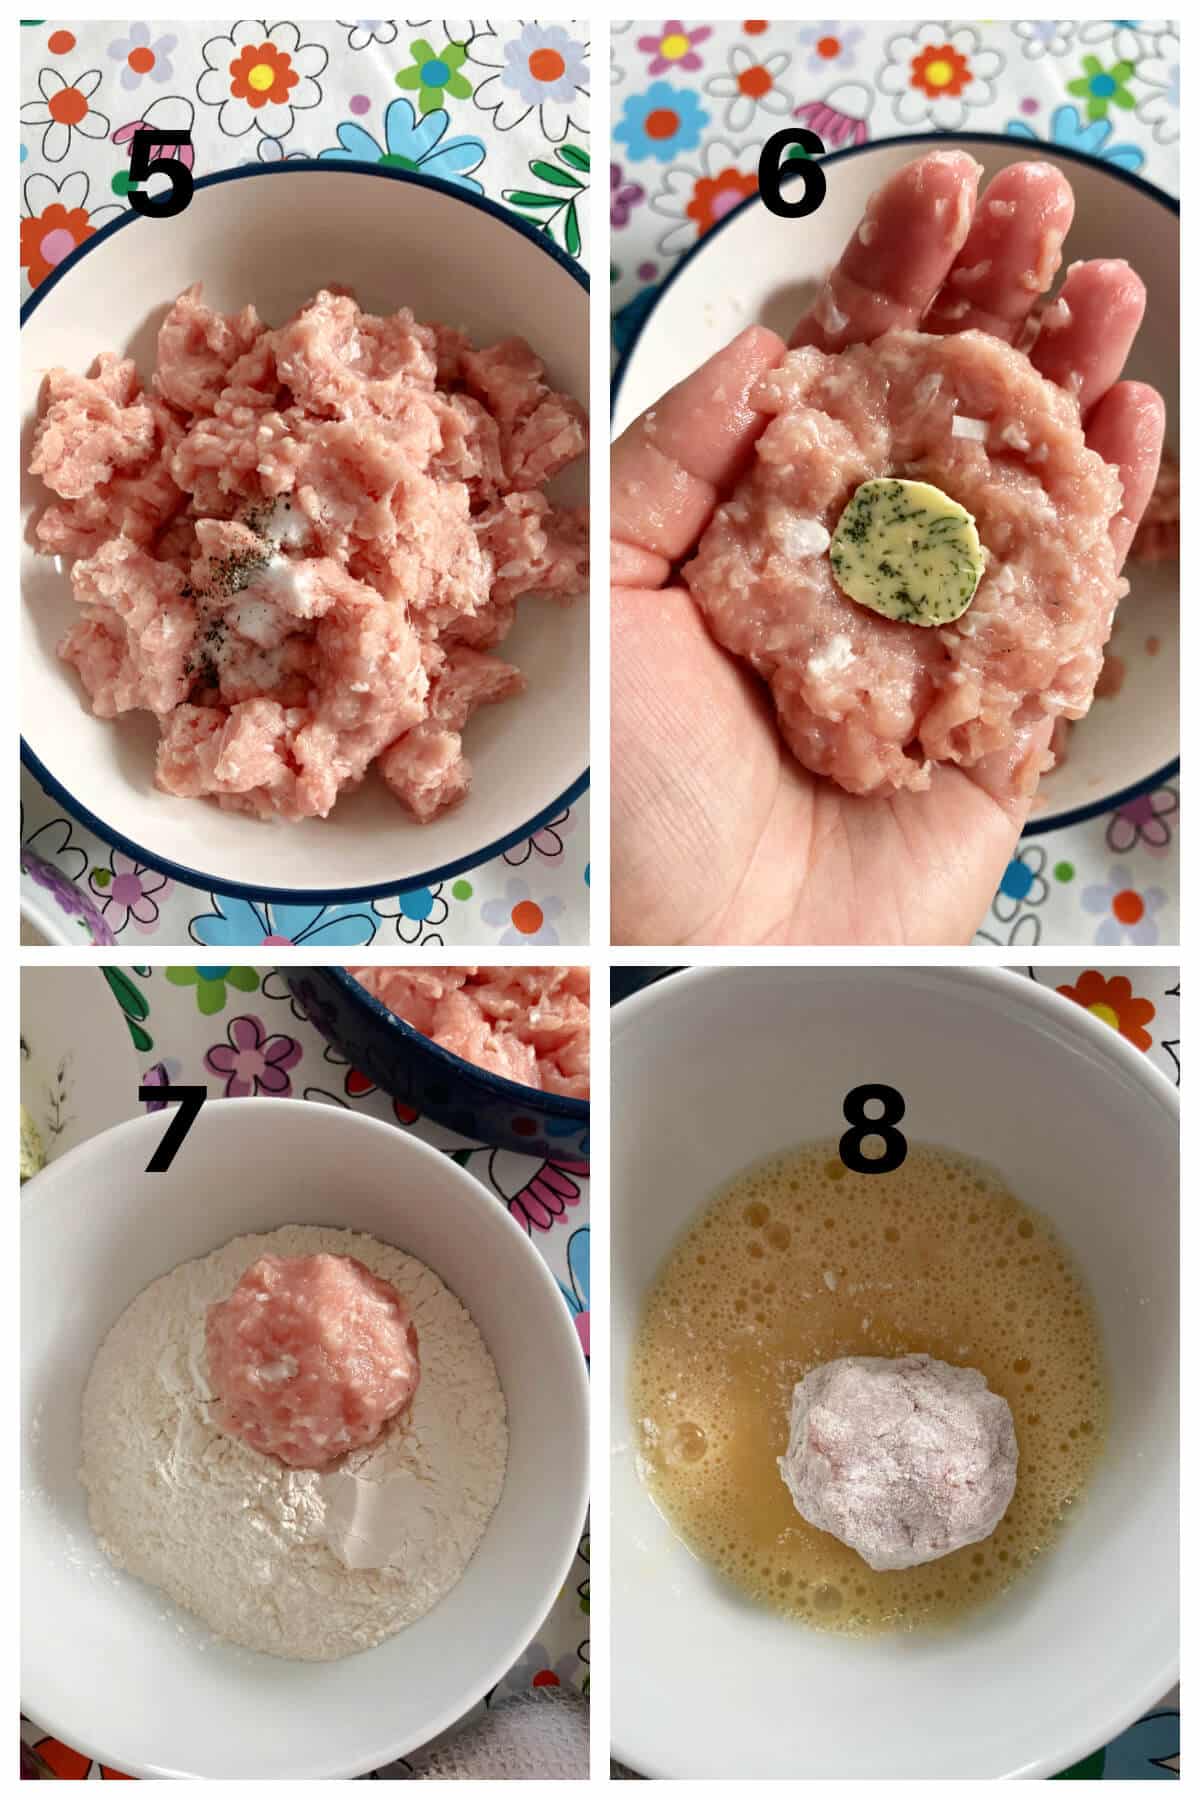 Collage of 4 photos to show how to make chicken kiev balls.